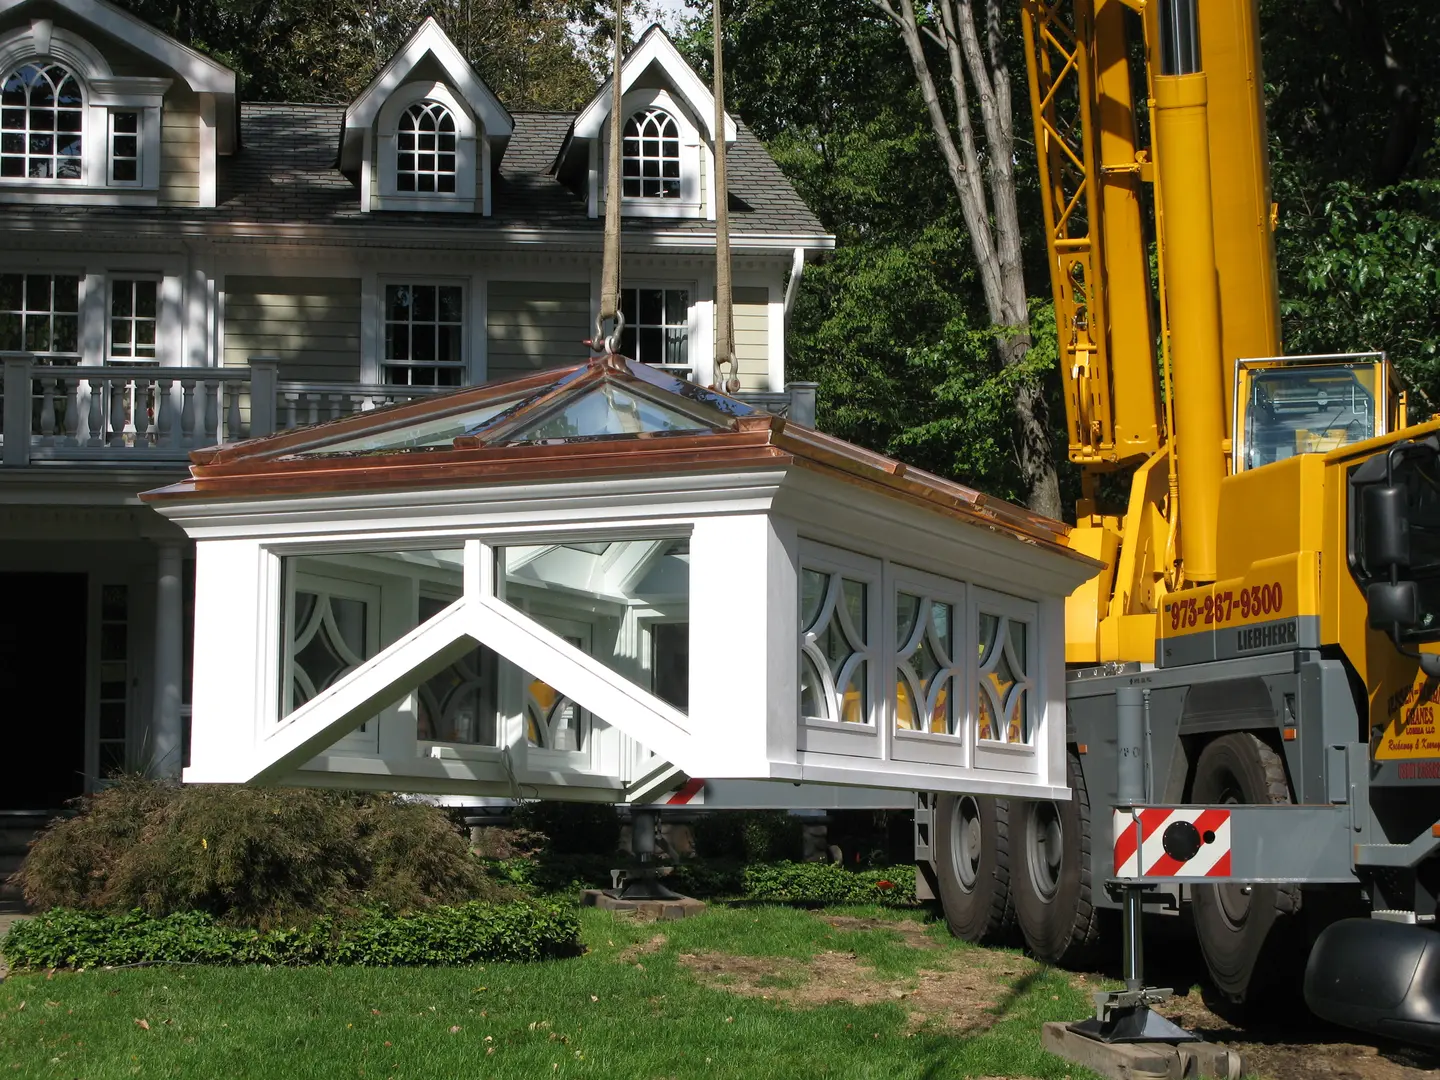 A crane is lifting a house on the ground.